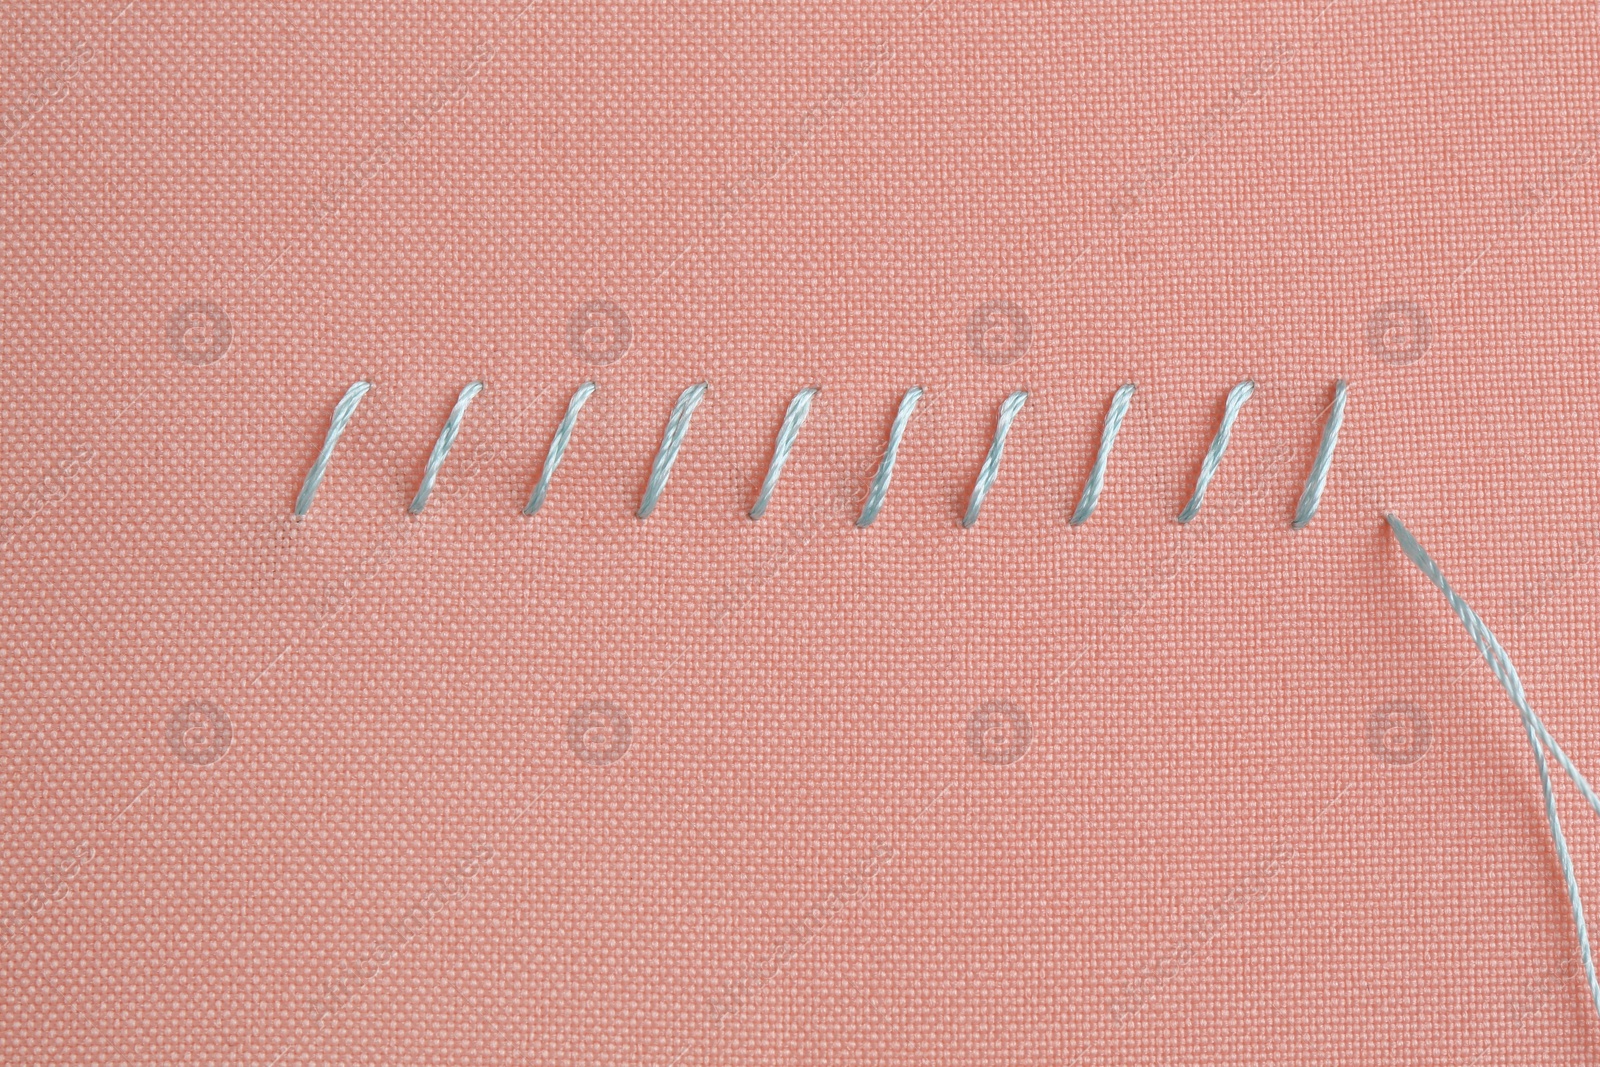 Photo of Sewing thread and stitches on coral cloth, top view